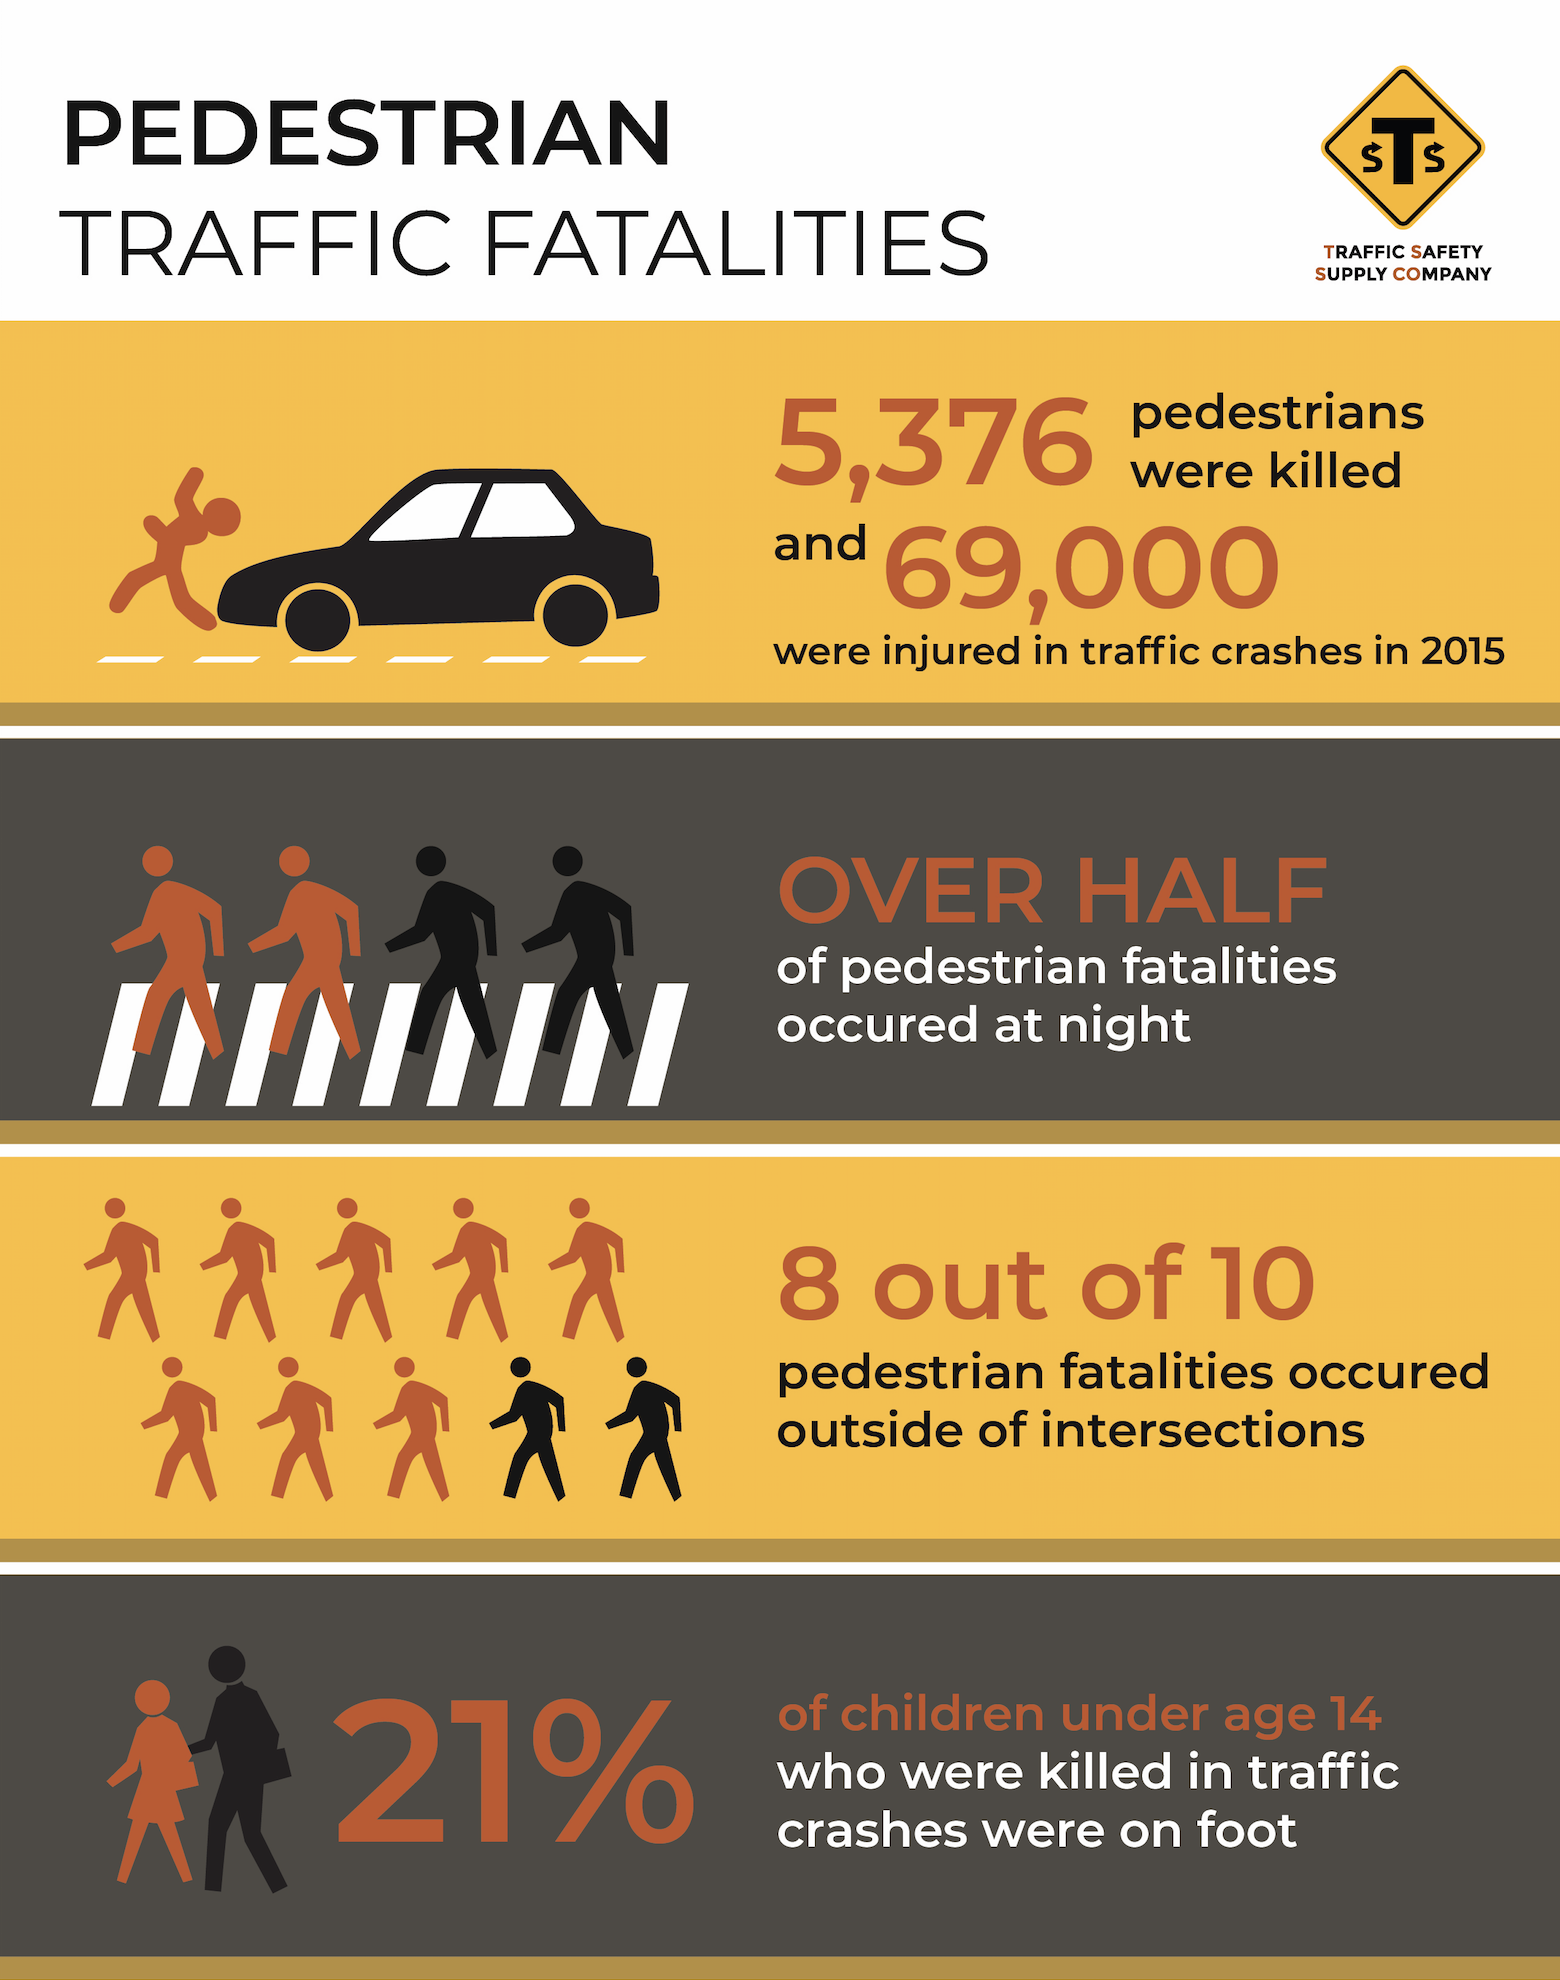 Tips for Pedestrian Safety Traffic Safety Supply Company